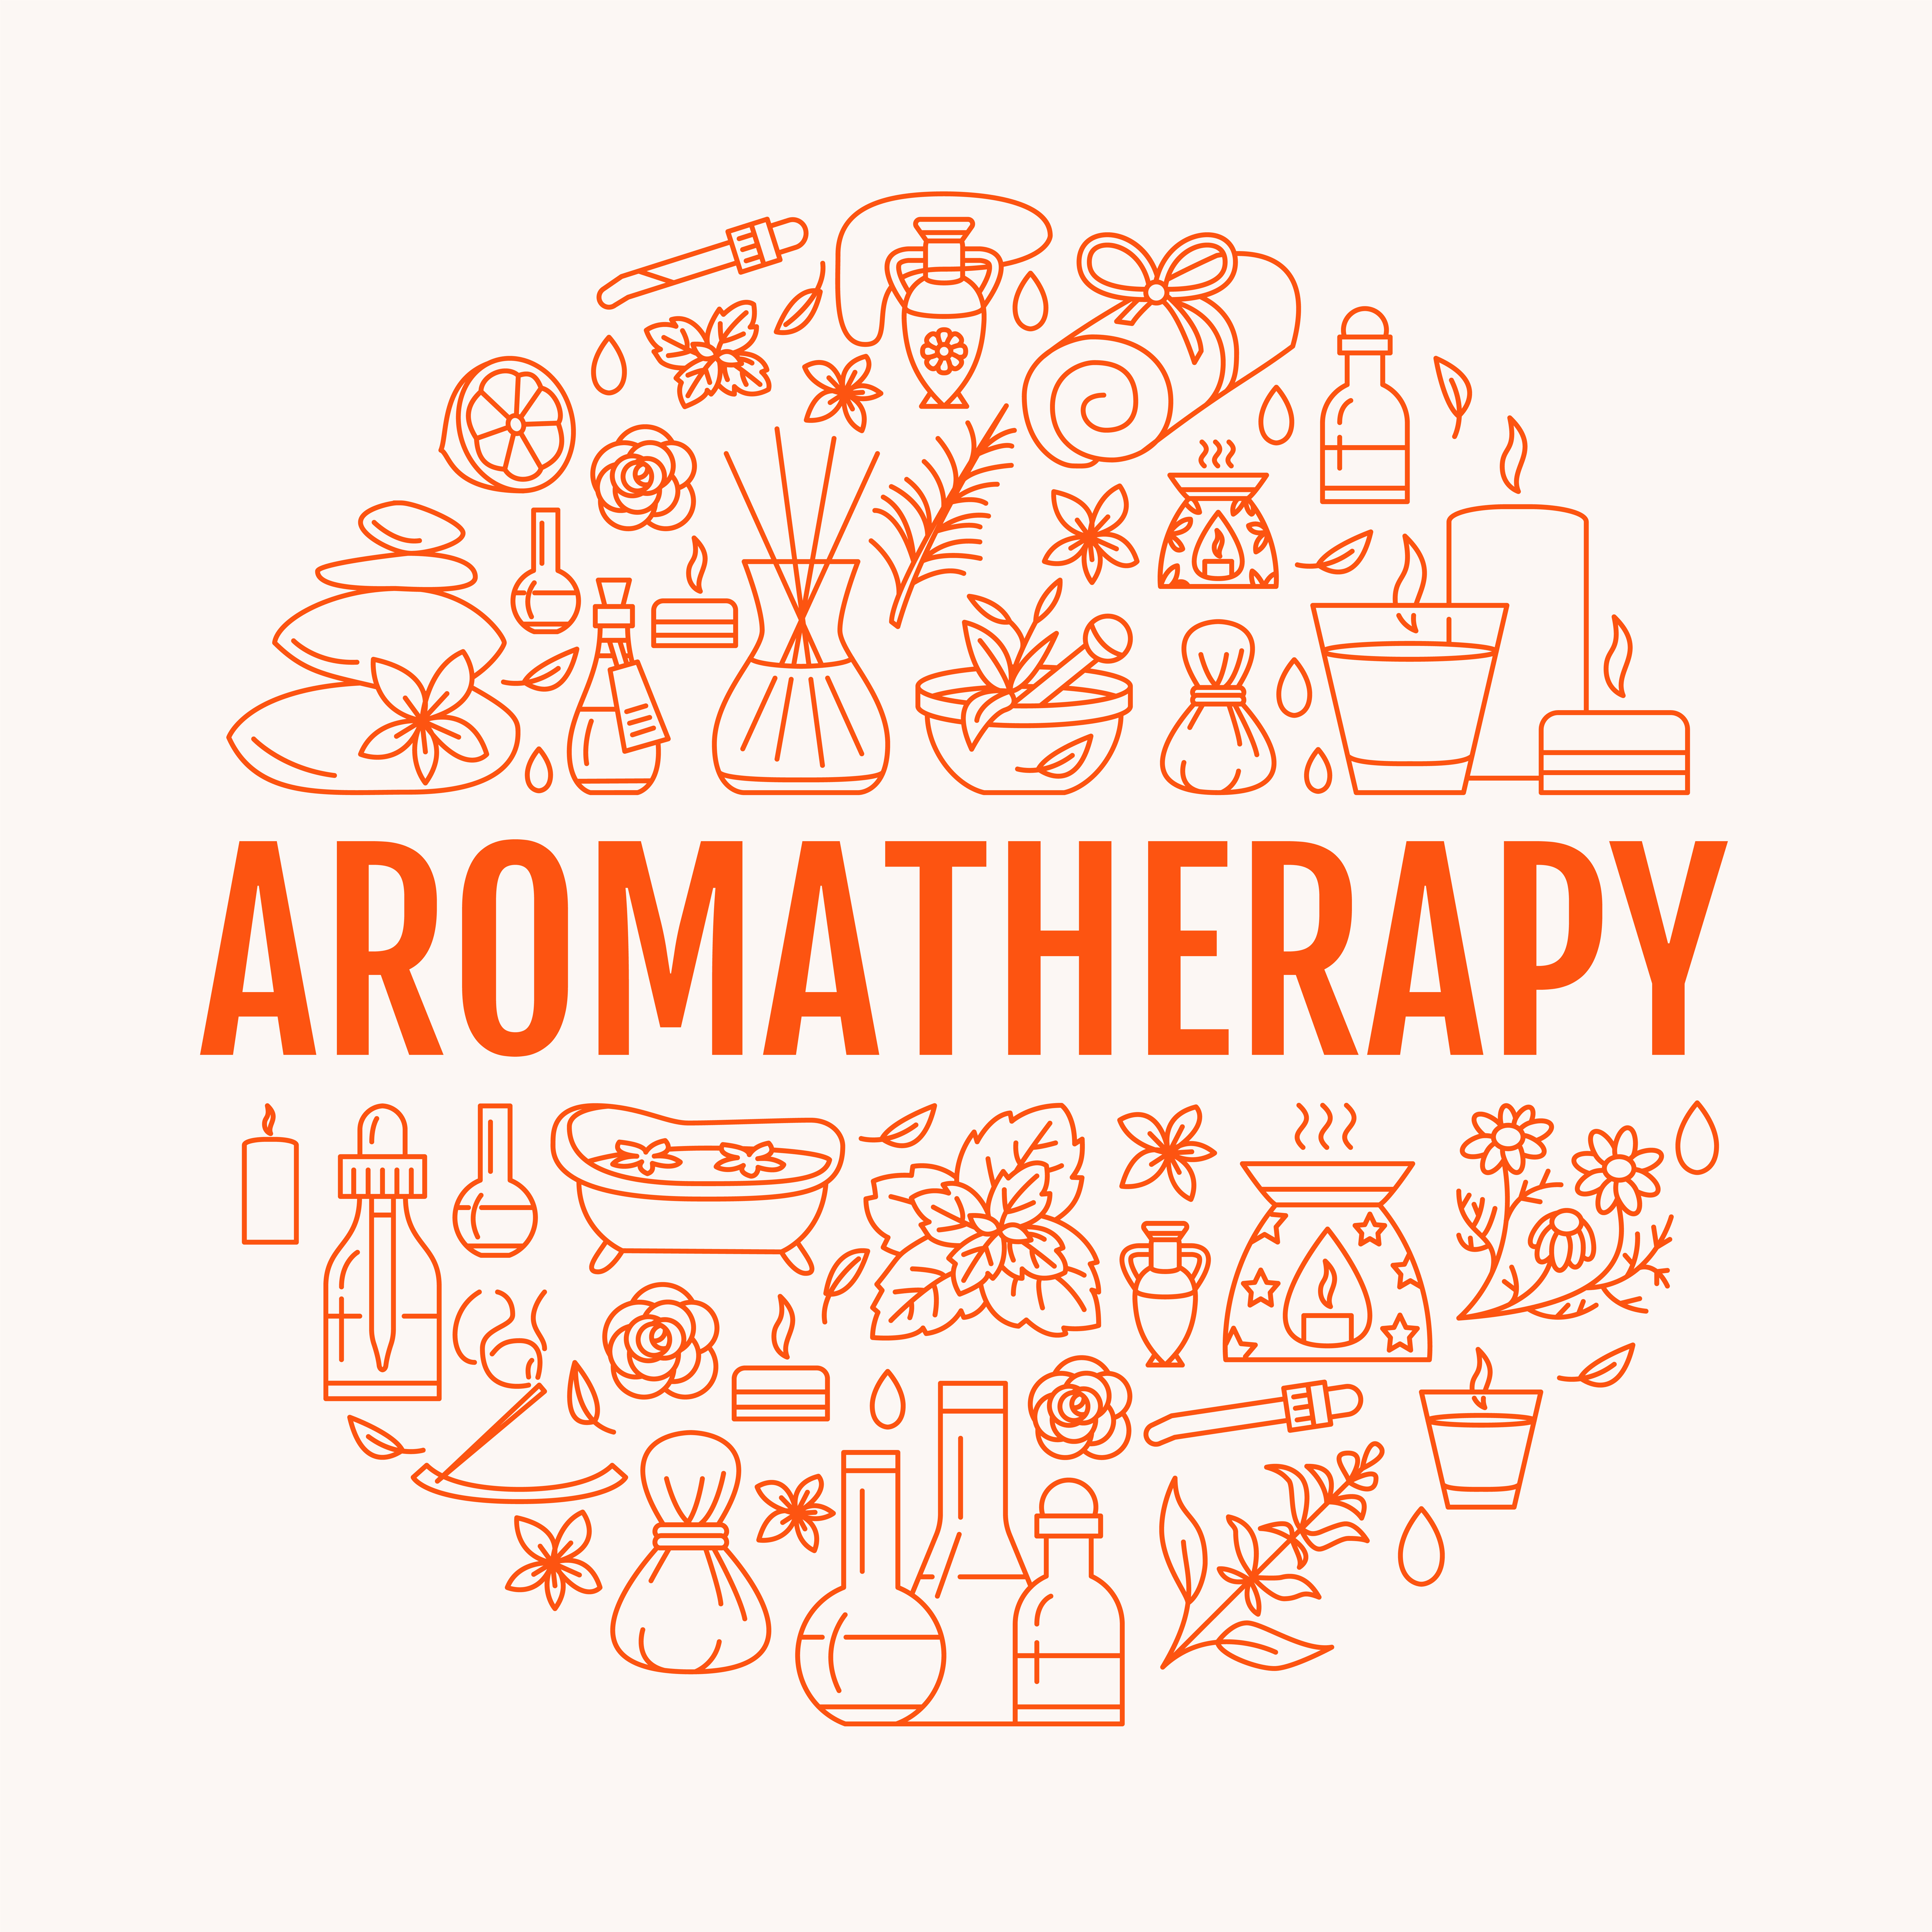 Aromatherapy and essential oils circle template. Vector line illustration of aromatherapy diffuser, oil burner, spa candles, incense stick, herbal bag massage. Essential oil poster